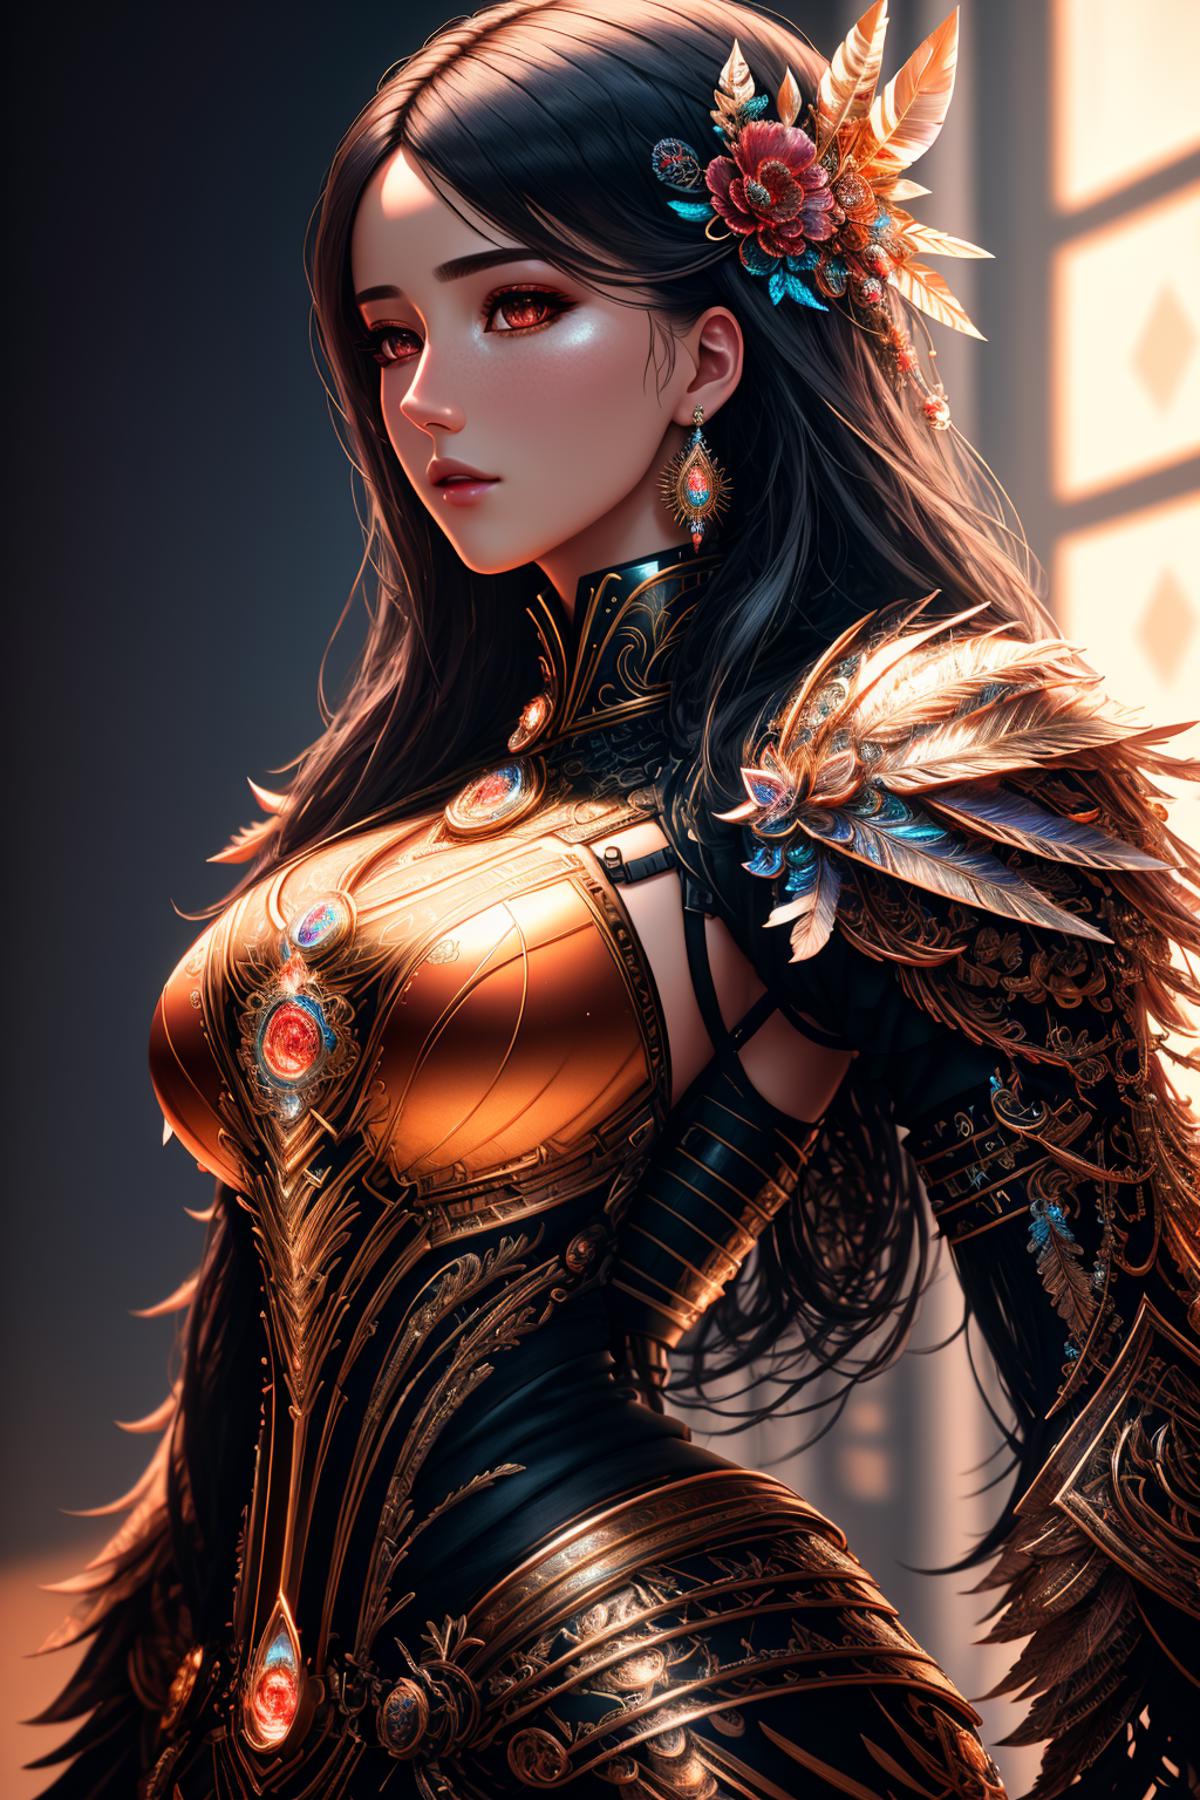 Fantasy Armors - an EDG collection image by EDG